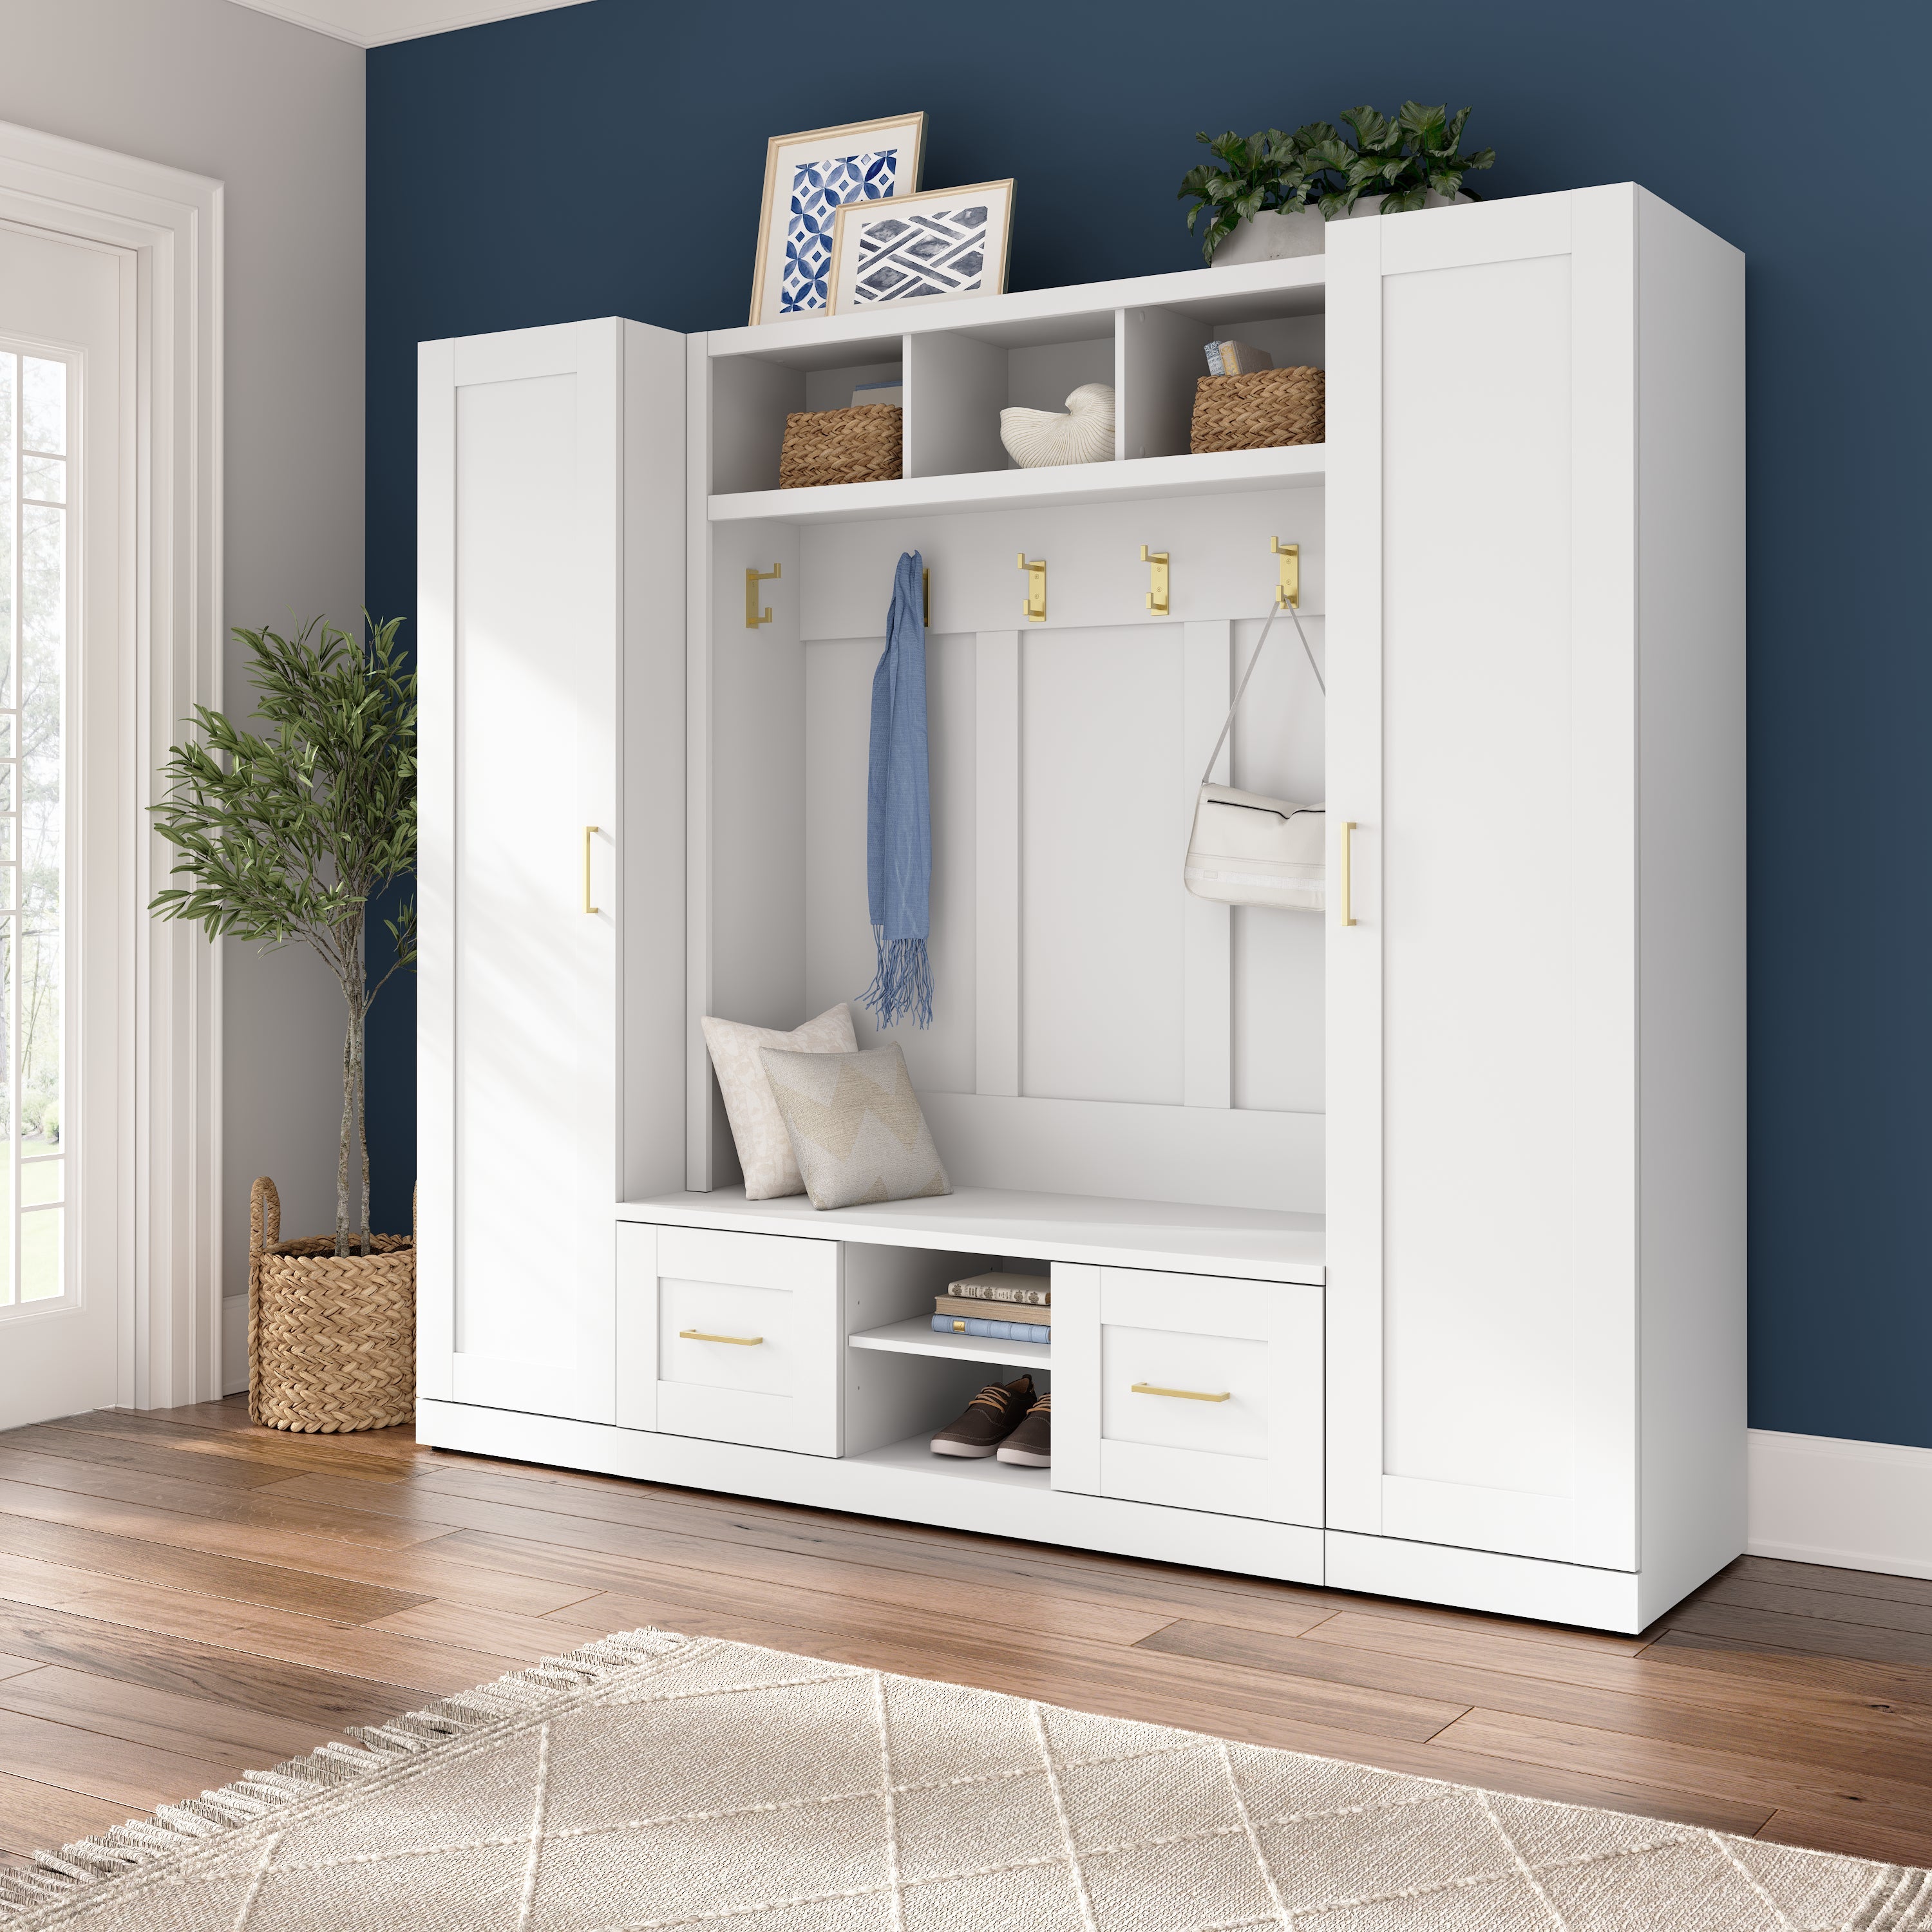 Shop Bush Furniture Hampton Heights Full Entryway Storage Set with Hall Tree, Shoe Bench with Doors and Narrow Cabinets 08 HHS015WH #color_white